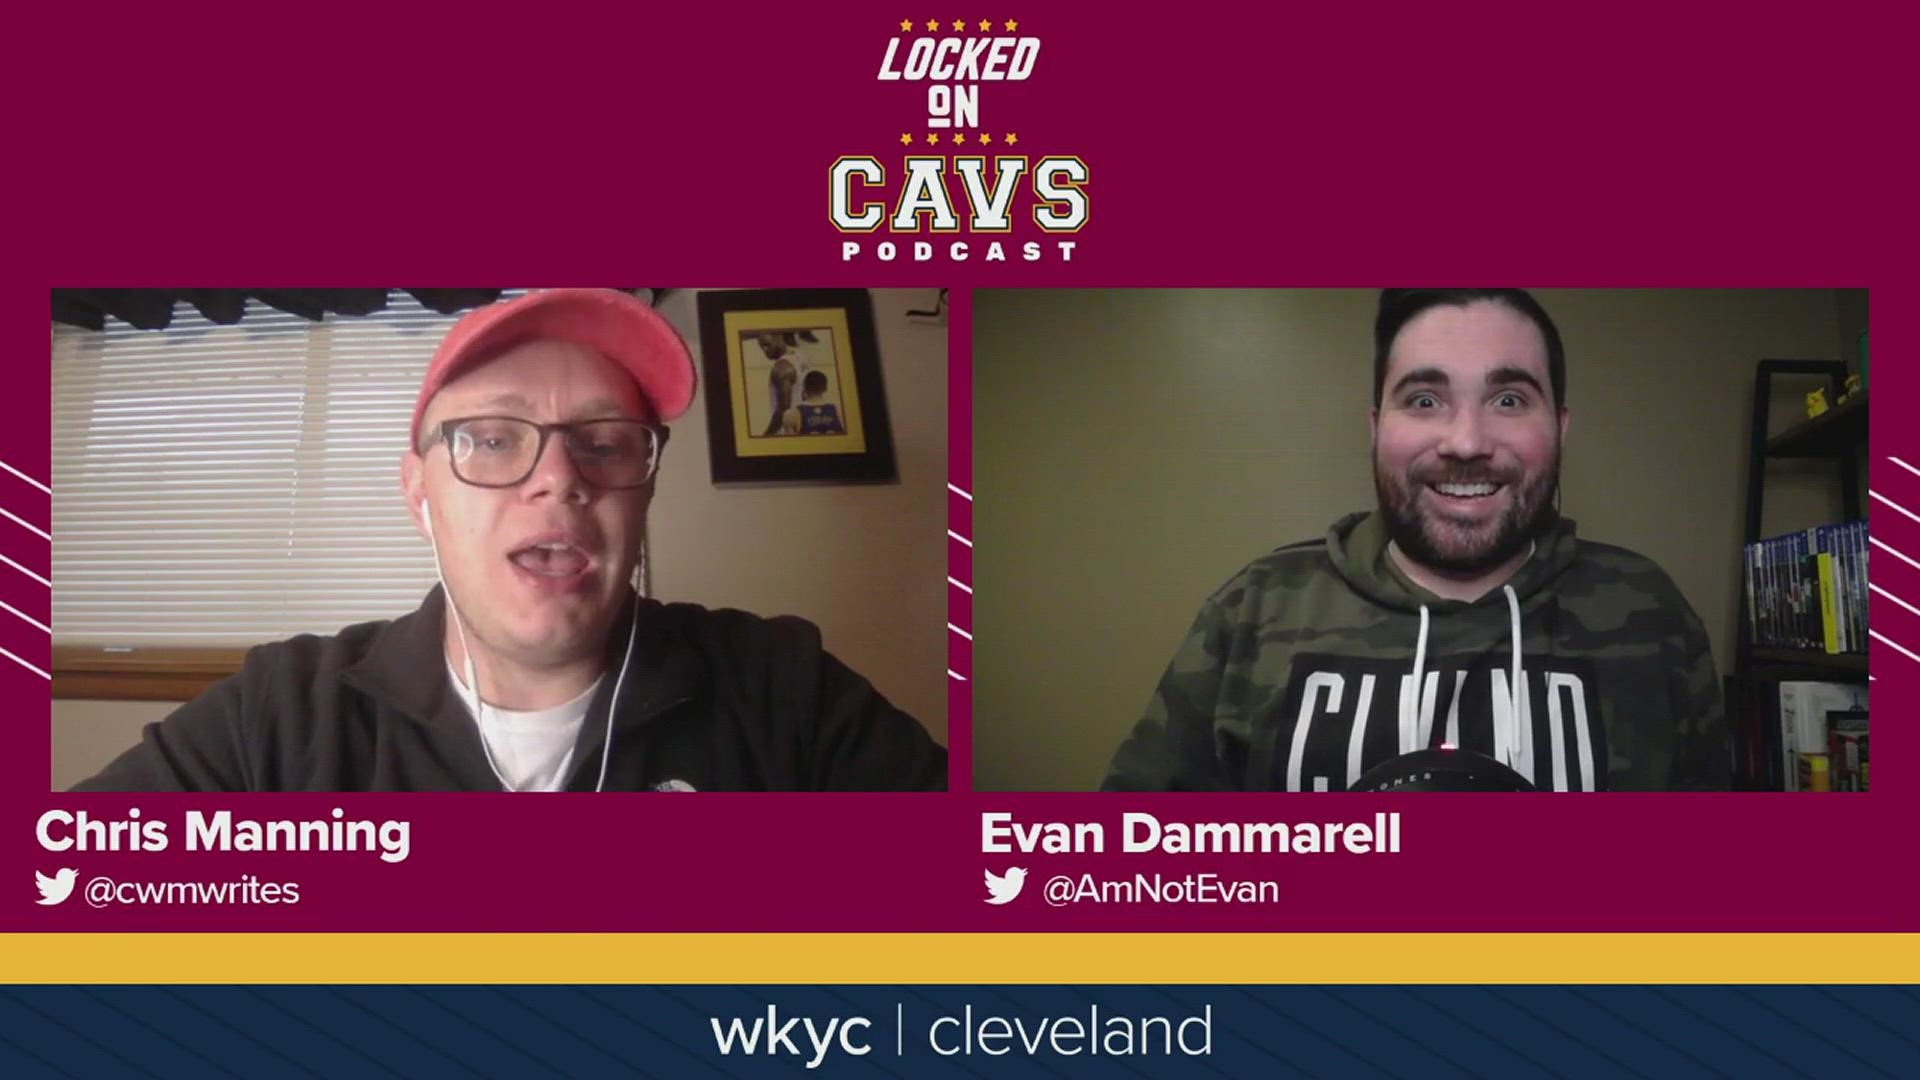 Locked on Cavs co-hosts Chris Manning and Evan Dammarell discuss the strong start for the Cavaliers and whether or not it's sustainable.